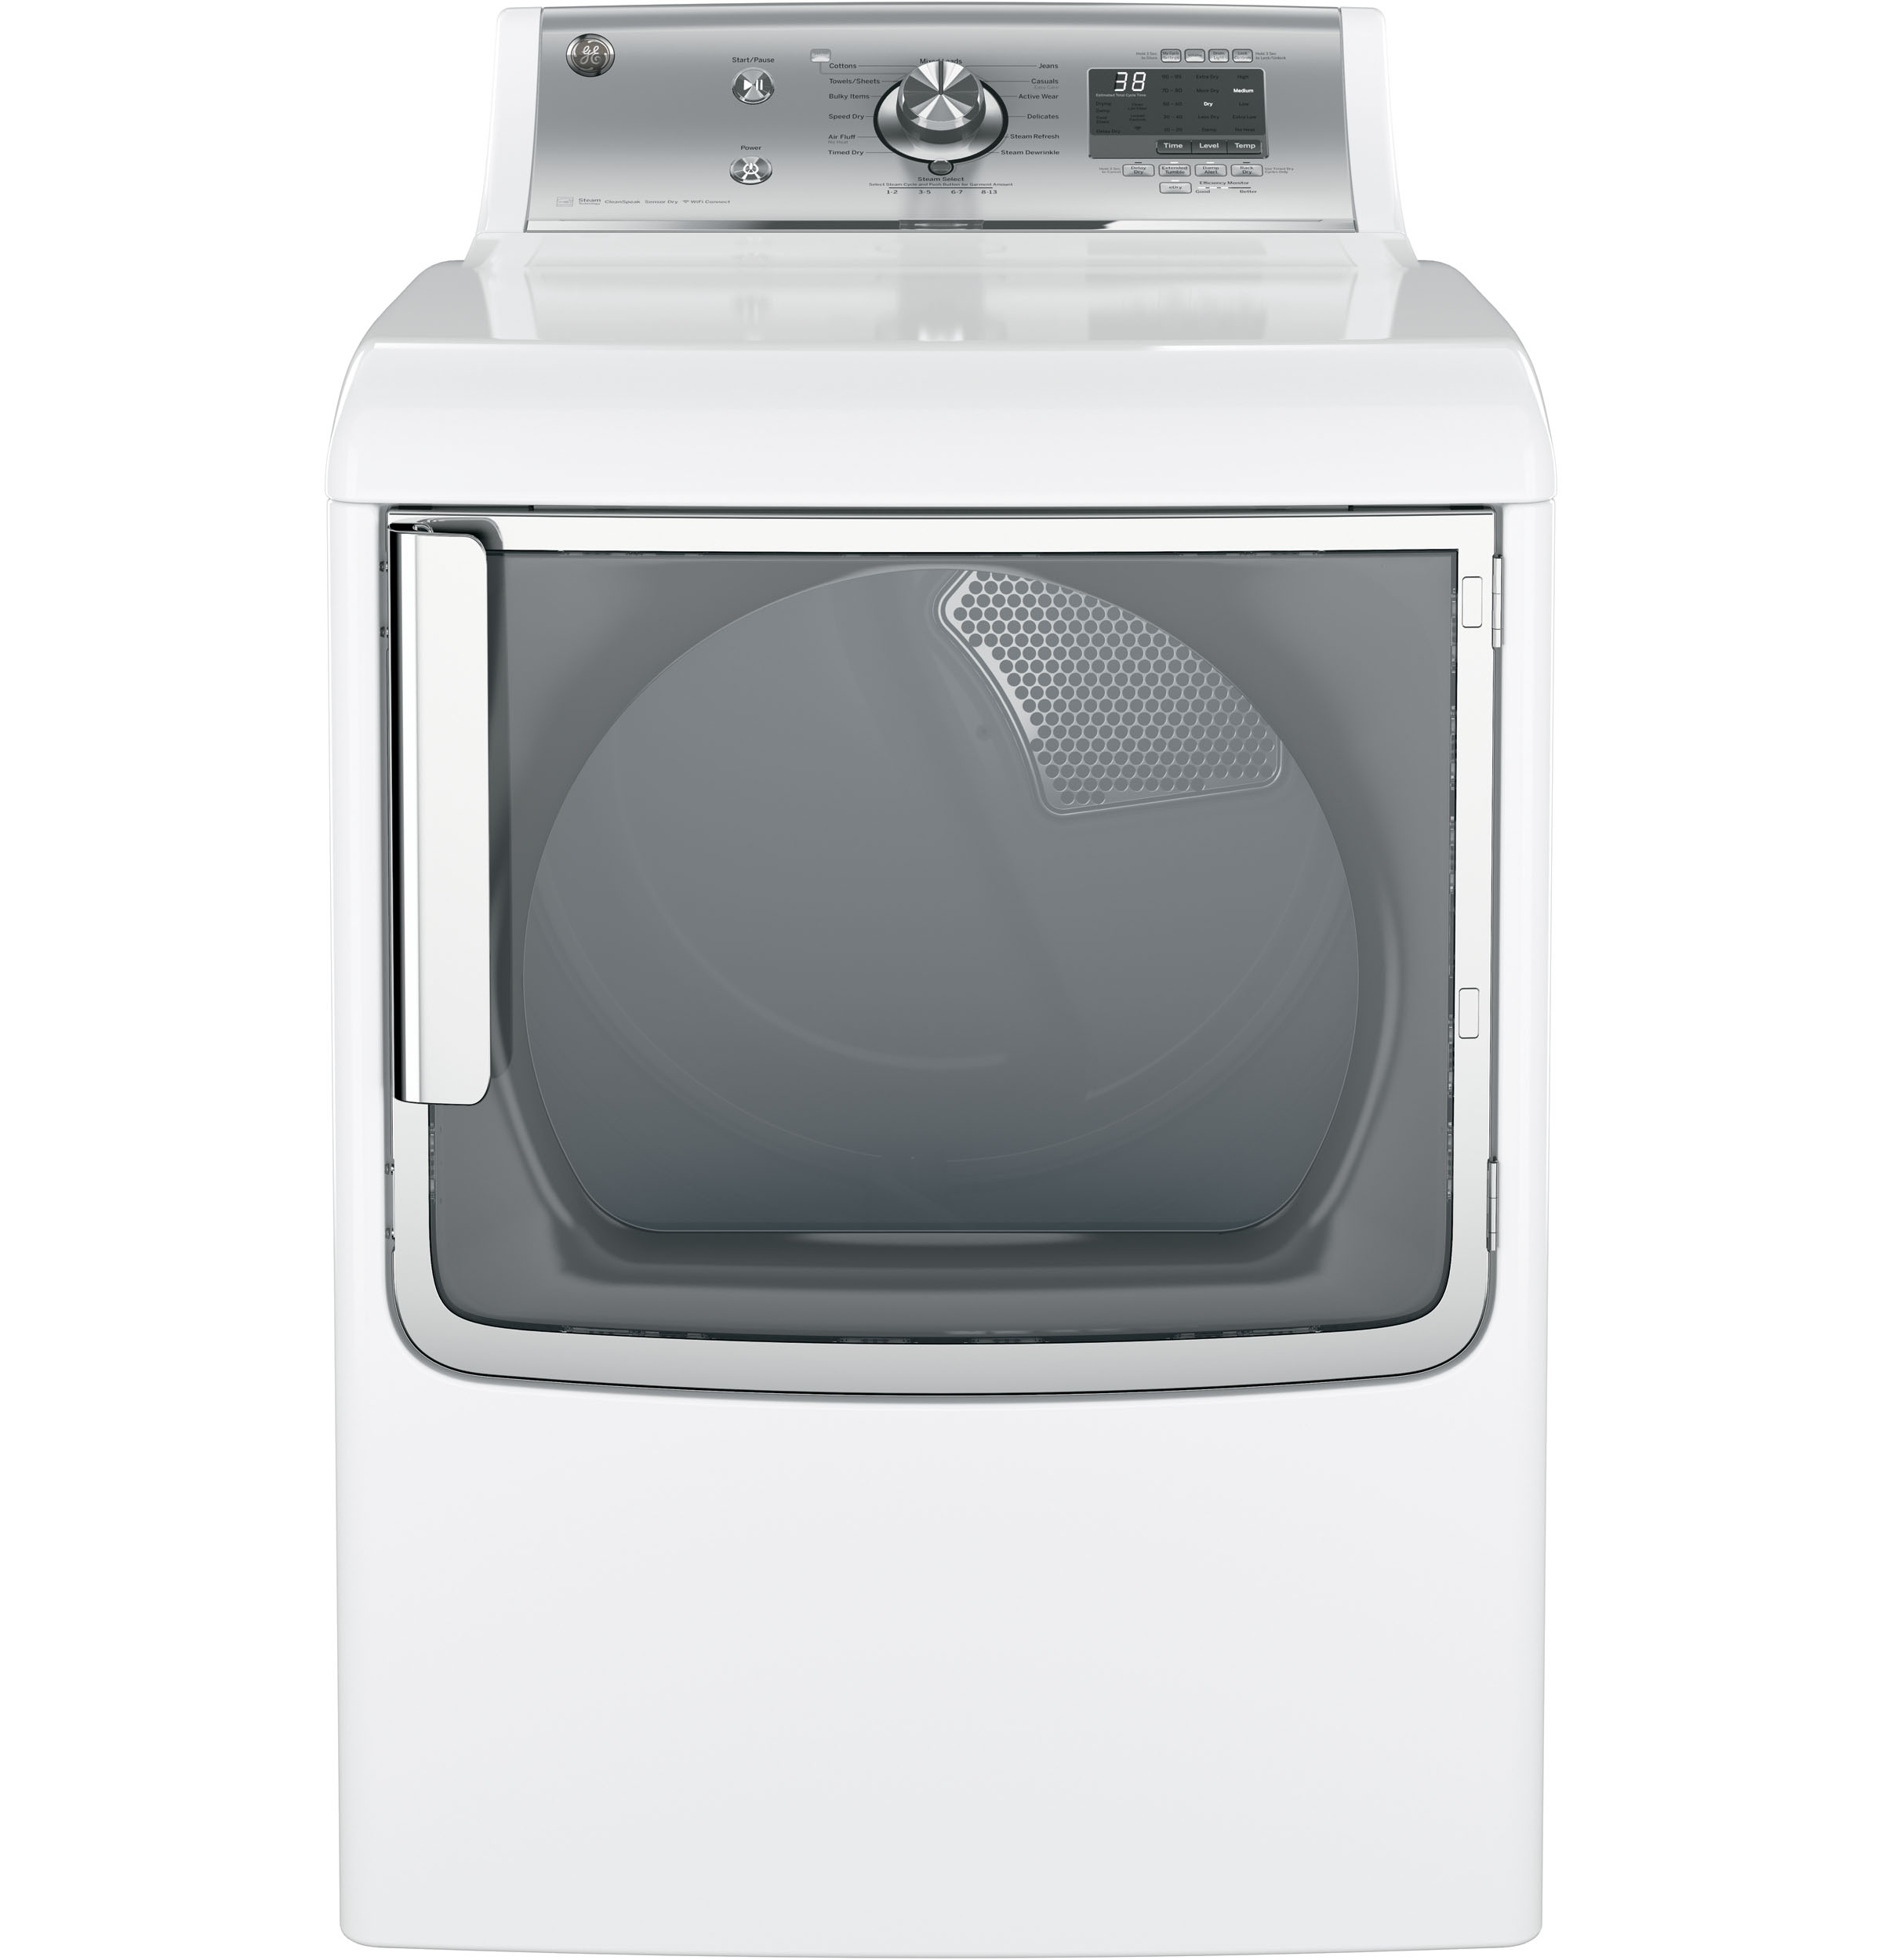 GE 7 8 Cu Ft Capacity Electric Dryer With Stainless Steel Drum And